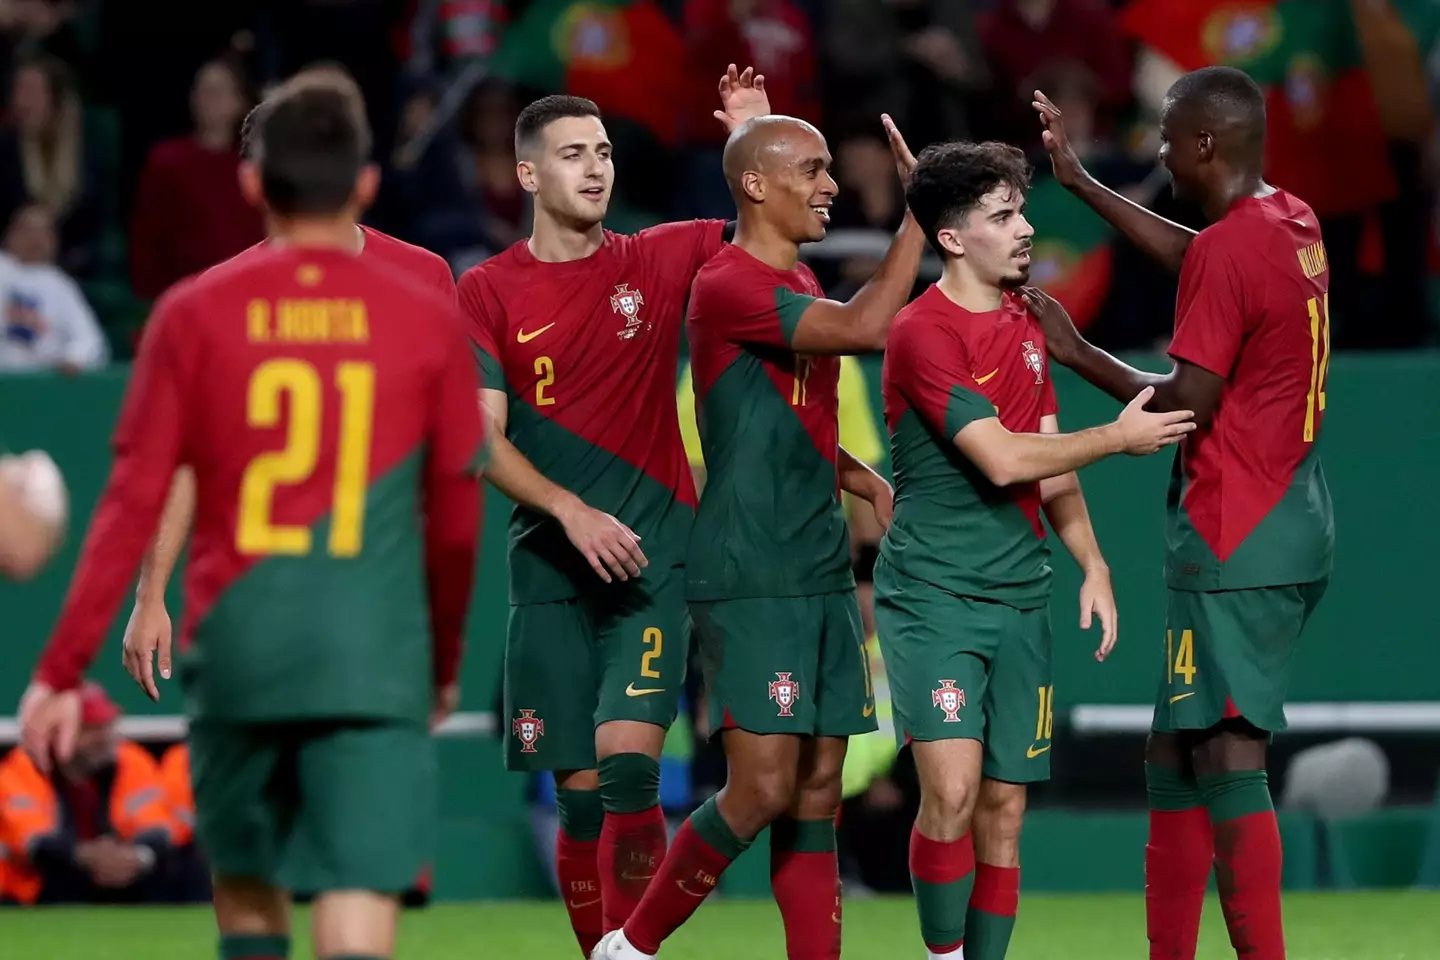 Portugal players celebrated Mario's goal. (Image